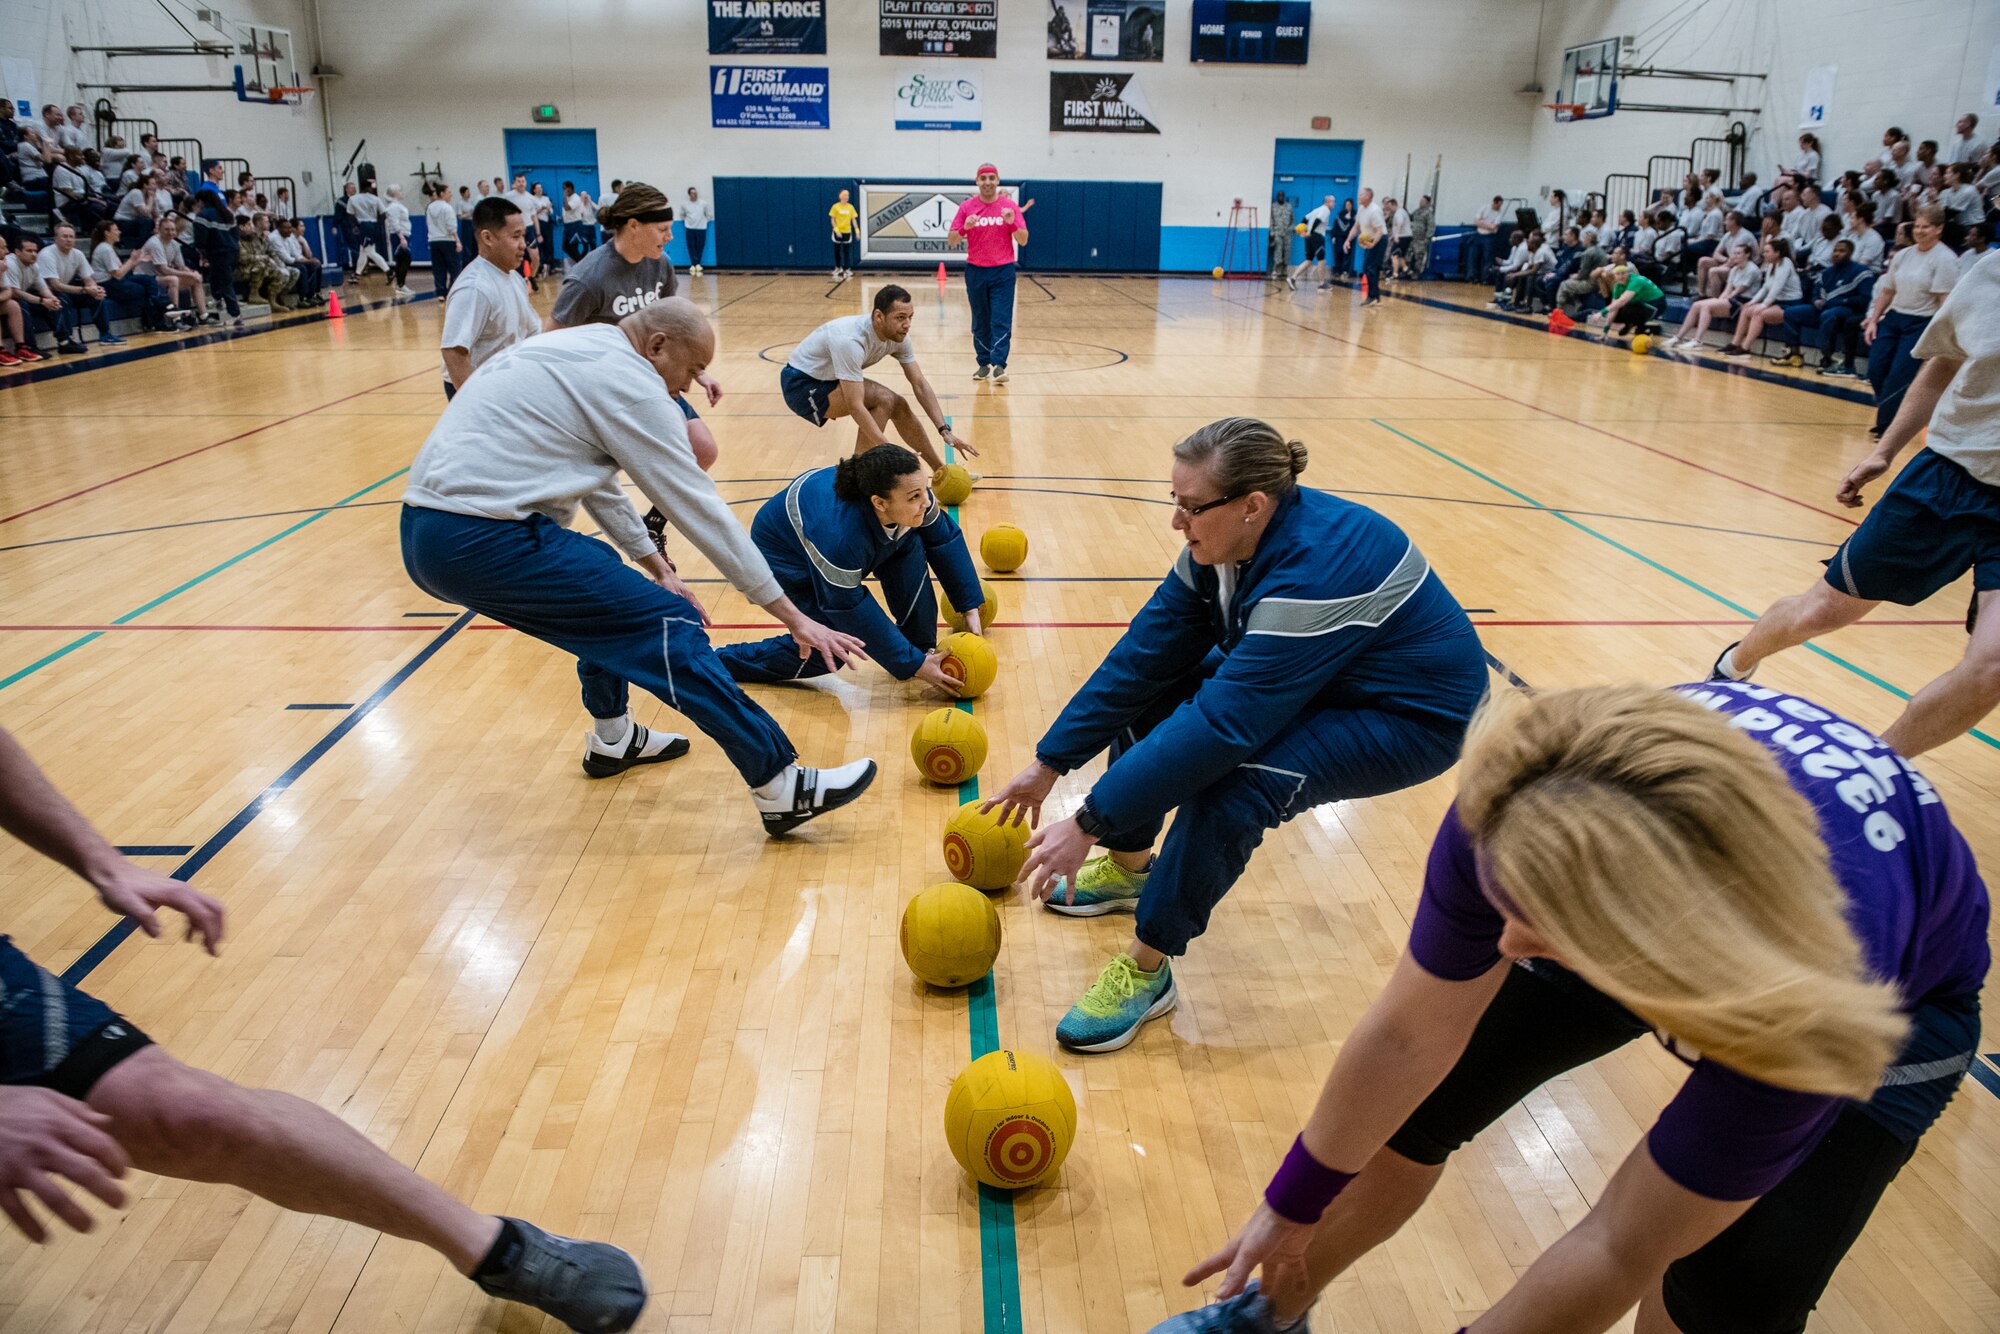 Citizen Airmen with the 932nd Medical Group join in some team building dodgeball during a resiliency pause February 9, 2020 Scott Air Force Base, Illinois. The intent of the planned pause is to give leadership and Airmen a chance to bond and create some camaraderie. (U.S. Air Force photo by Master Sgt. Christopher Parr)